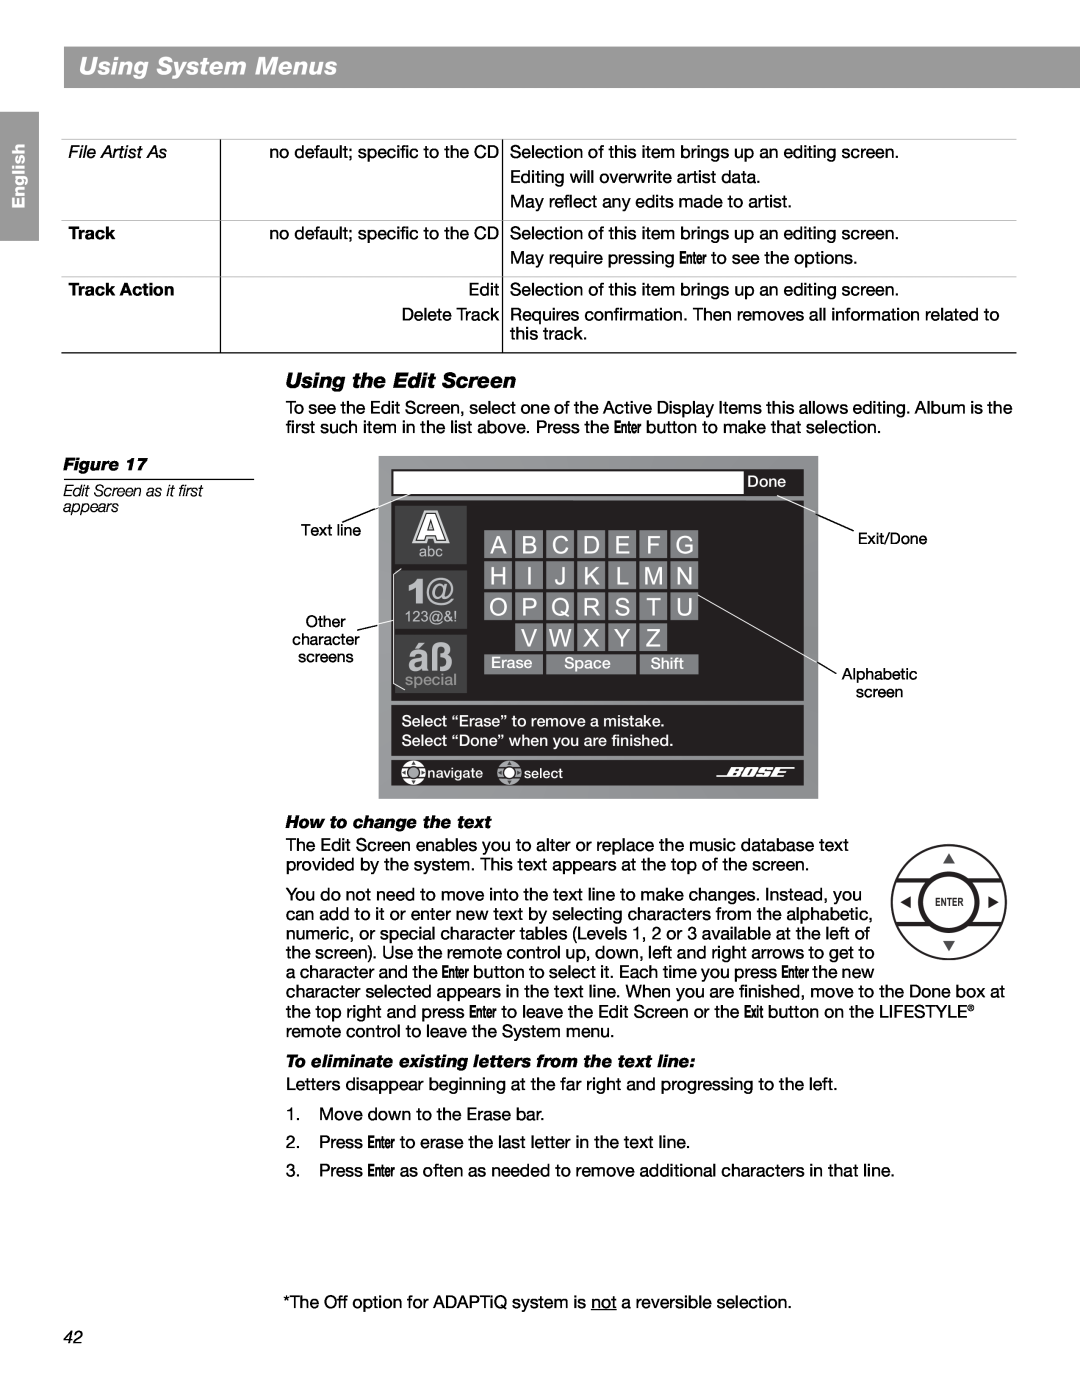 Bose LIFESTYLE 48 manual Using System Menus, English Español, Track Action, Français, Figure, How to change the text 